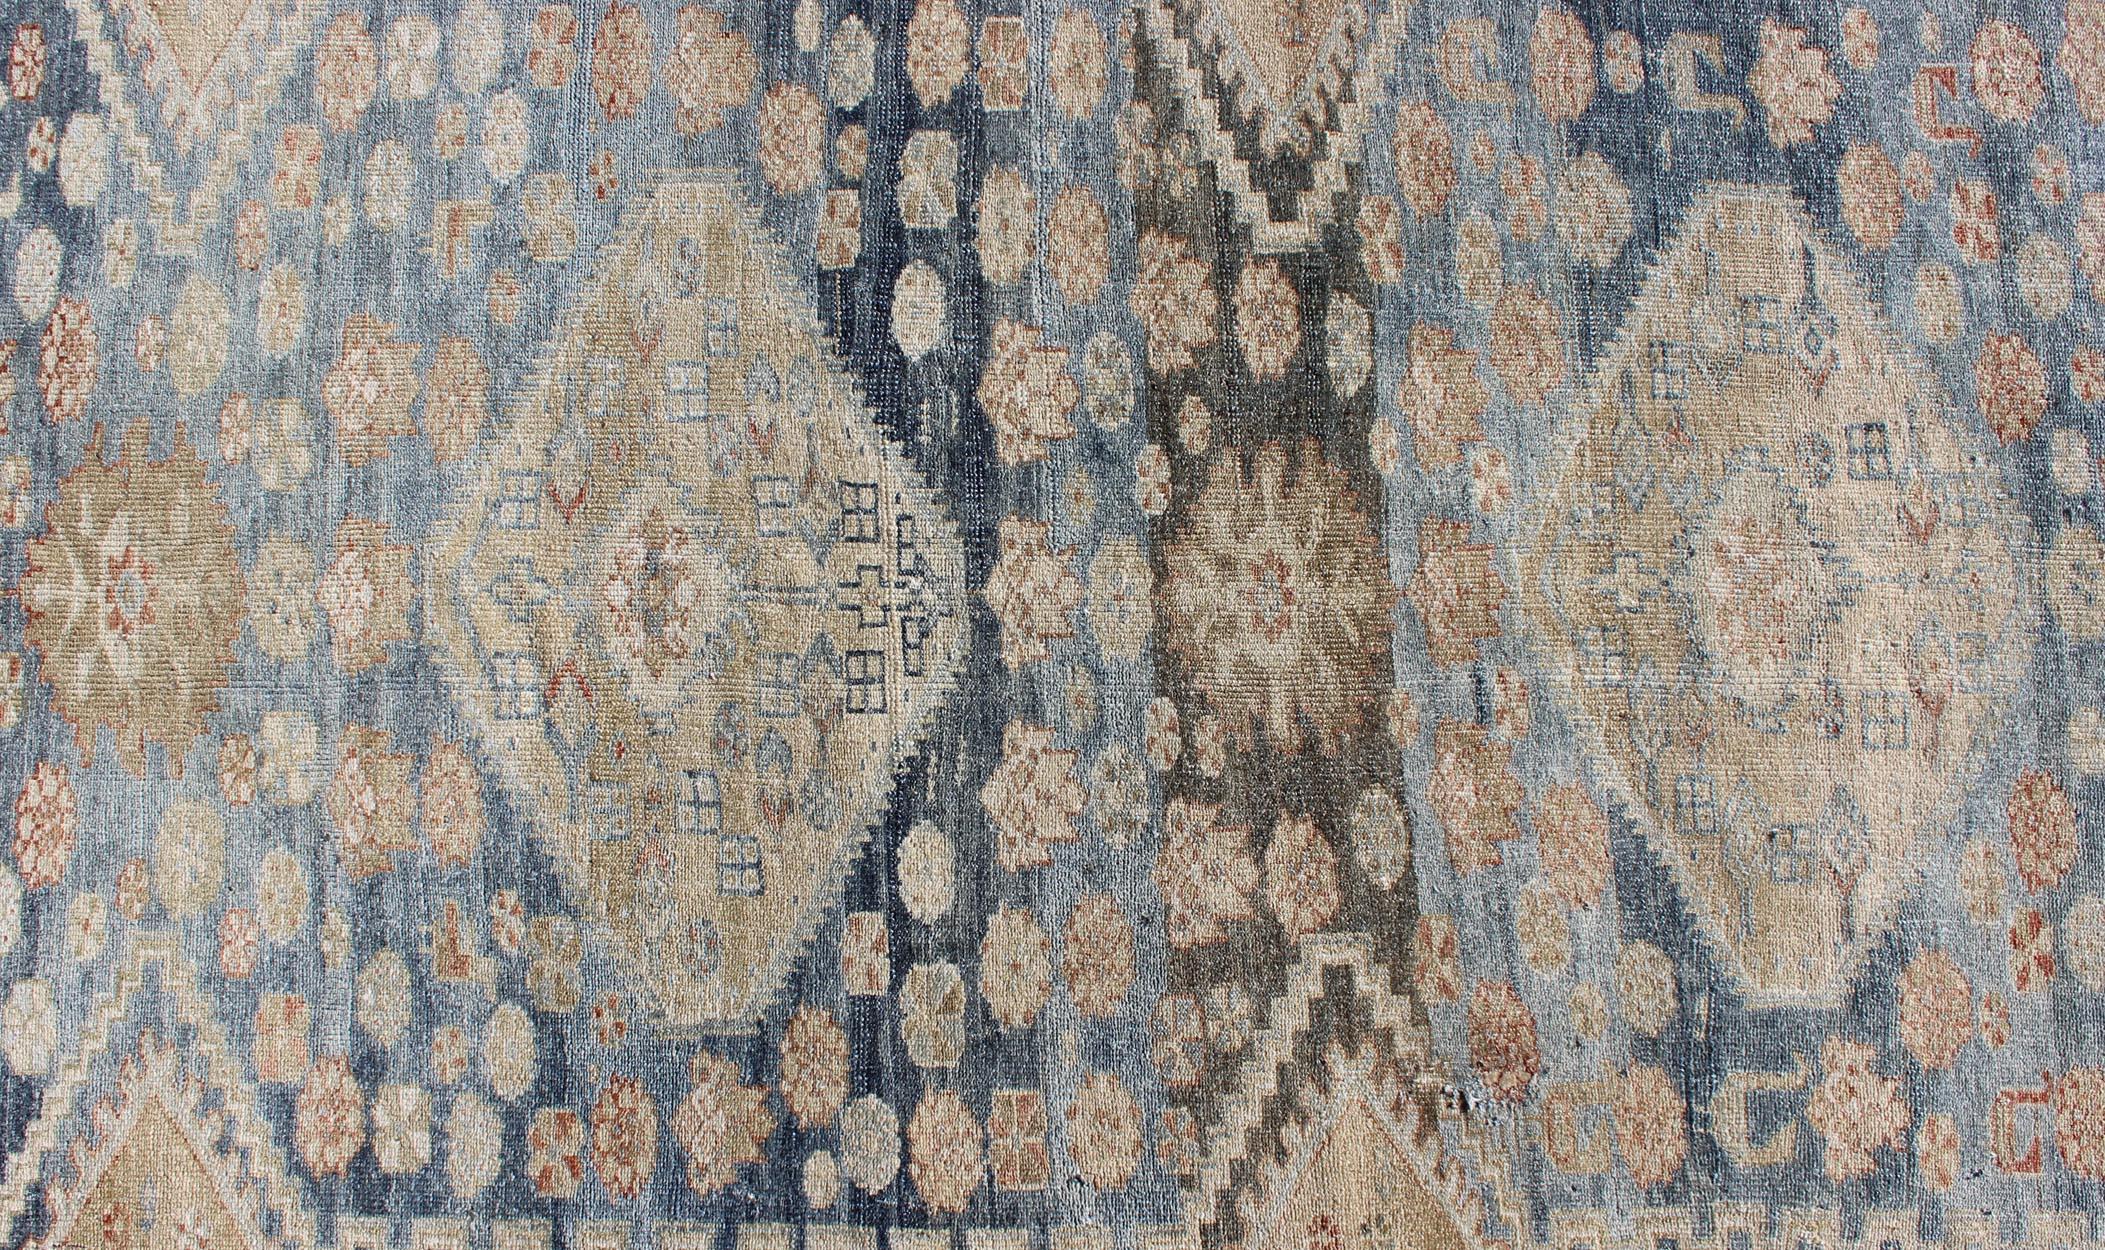 Tribal Persian Malayer Rug with Geometric Design in Steel Blue and Tan Tones 6